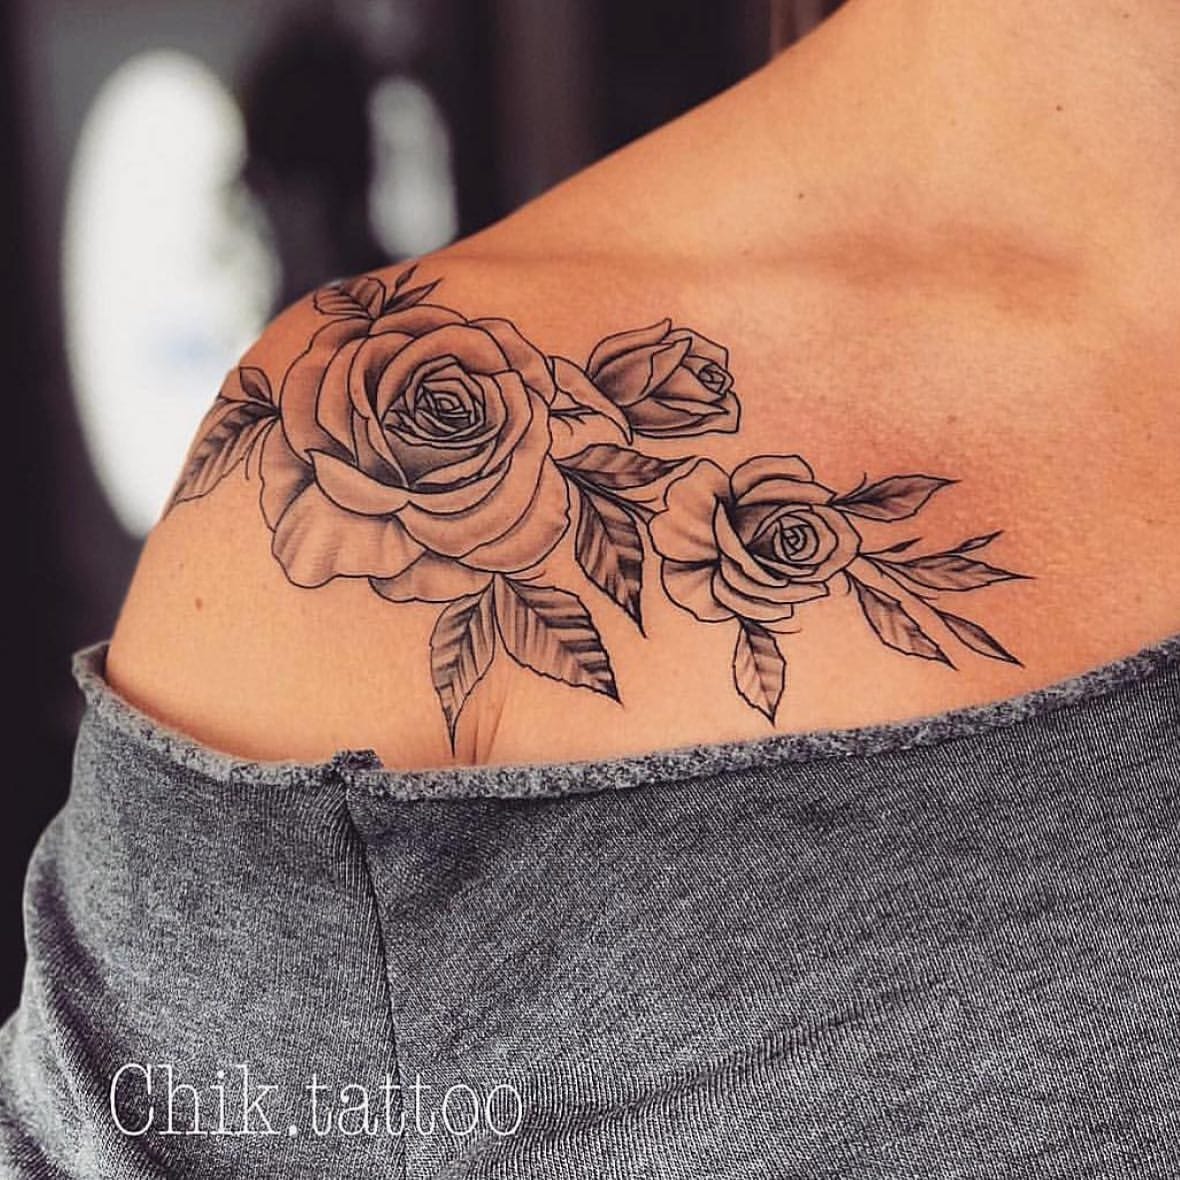 100+ The Most Beautiful Flower Tattoos